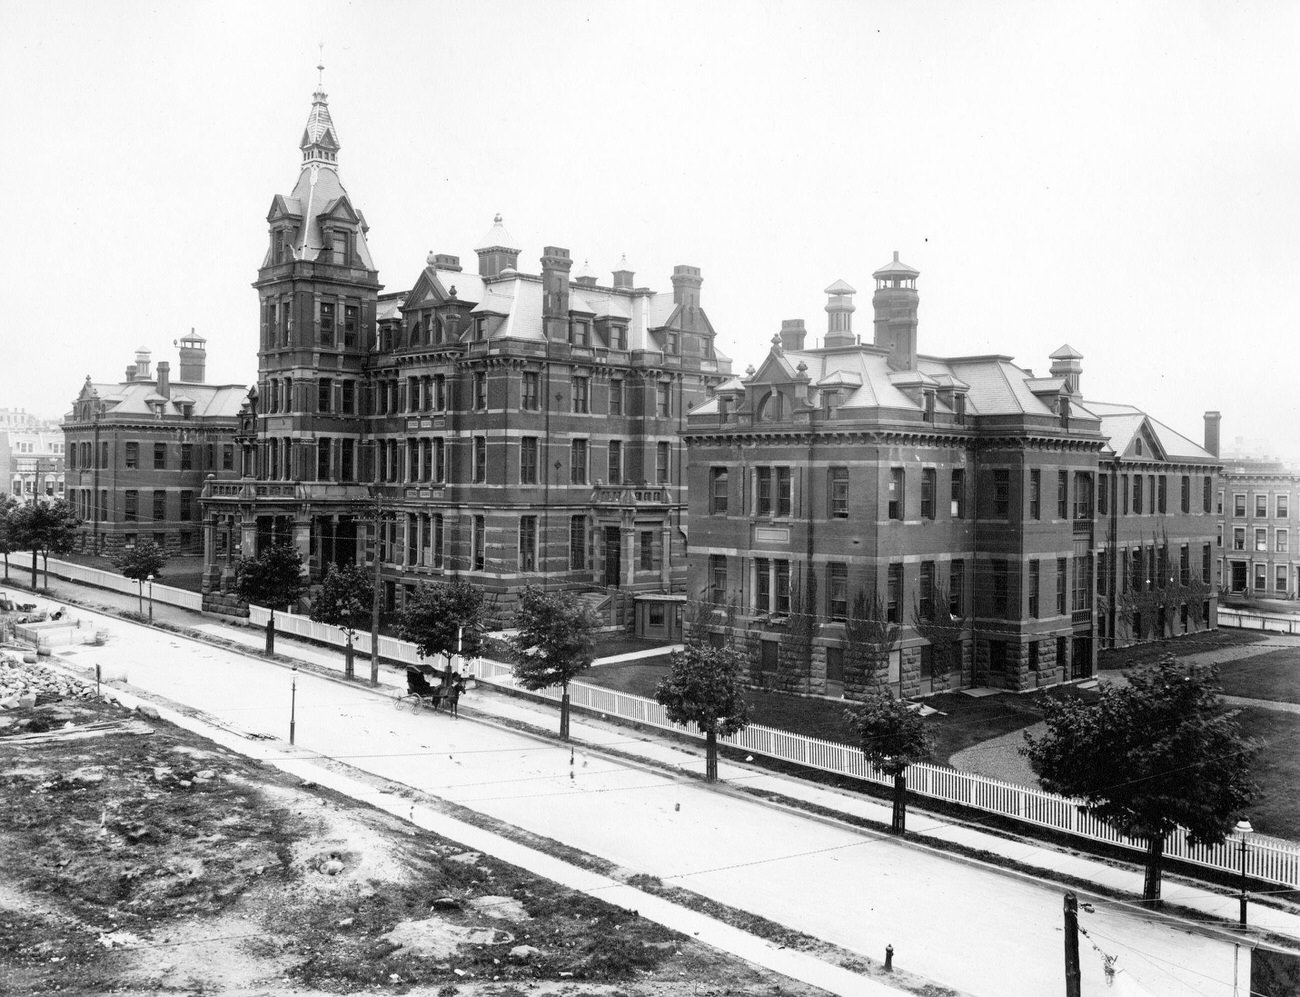 Seney Hospital On Seventh Avenue Between 6Th And 7Th Streets, Brooklyn, 1895